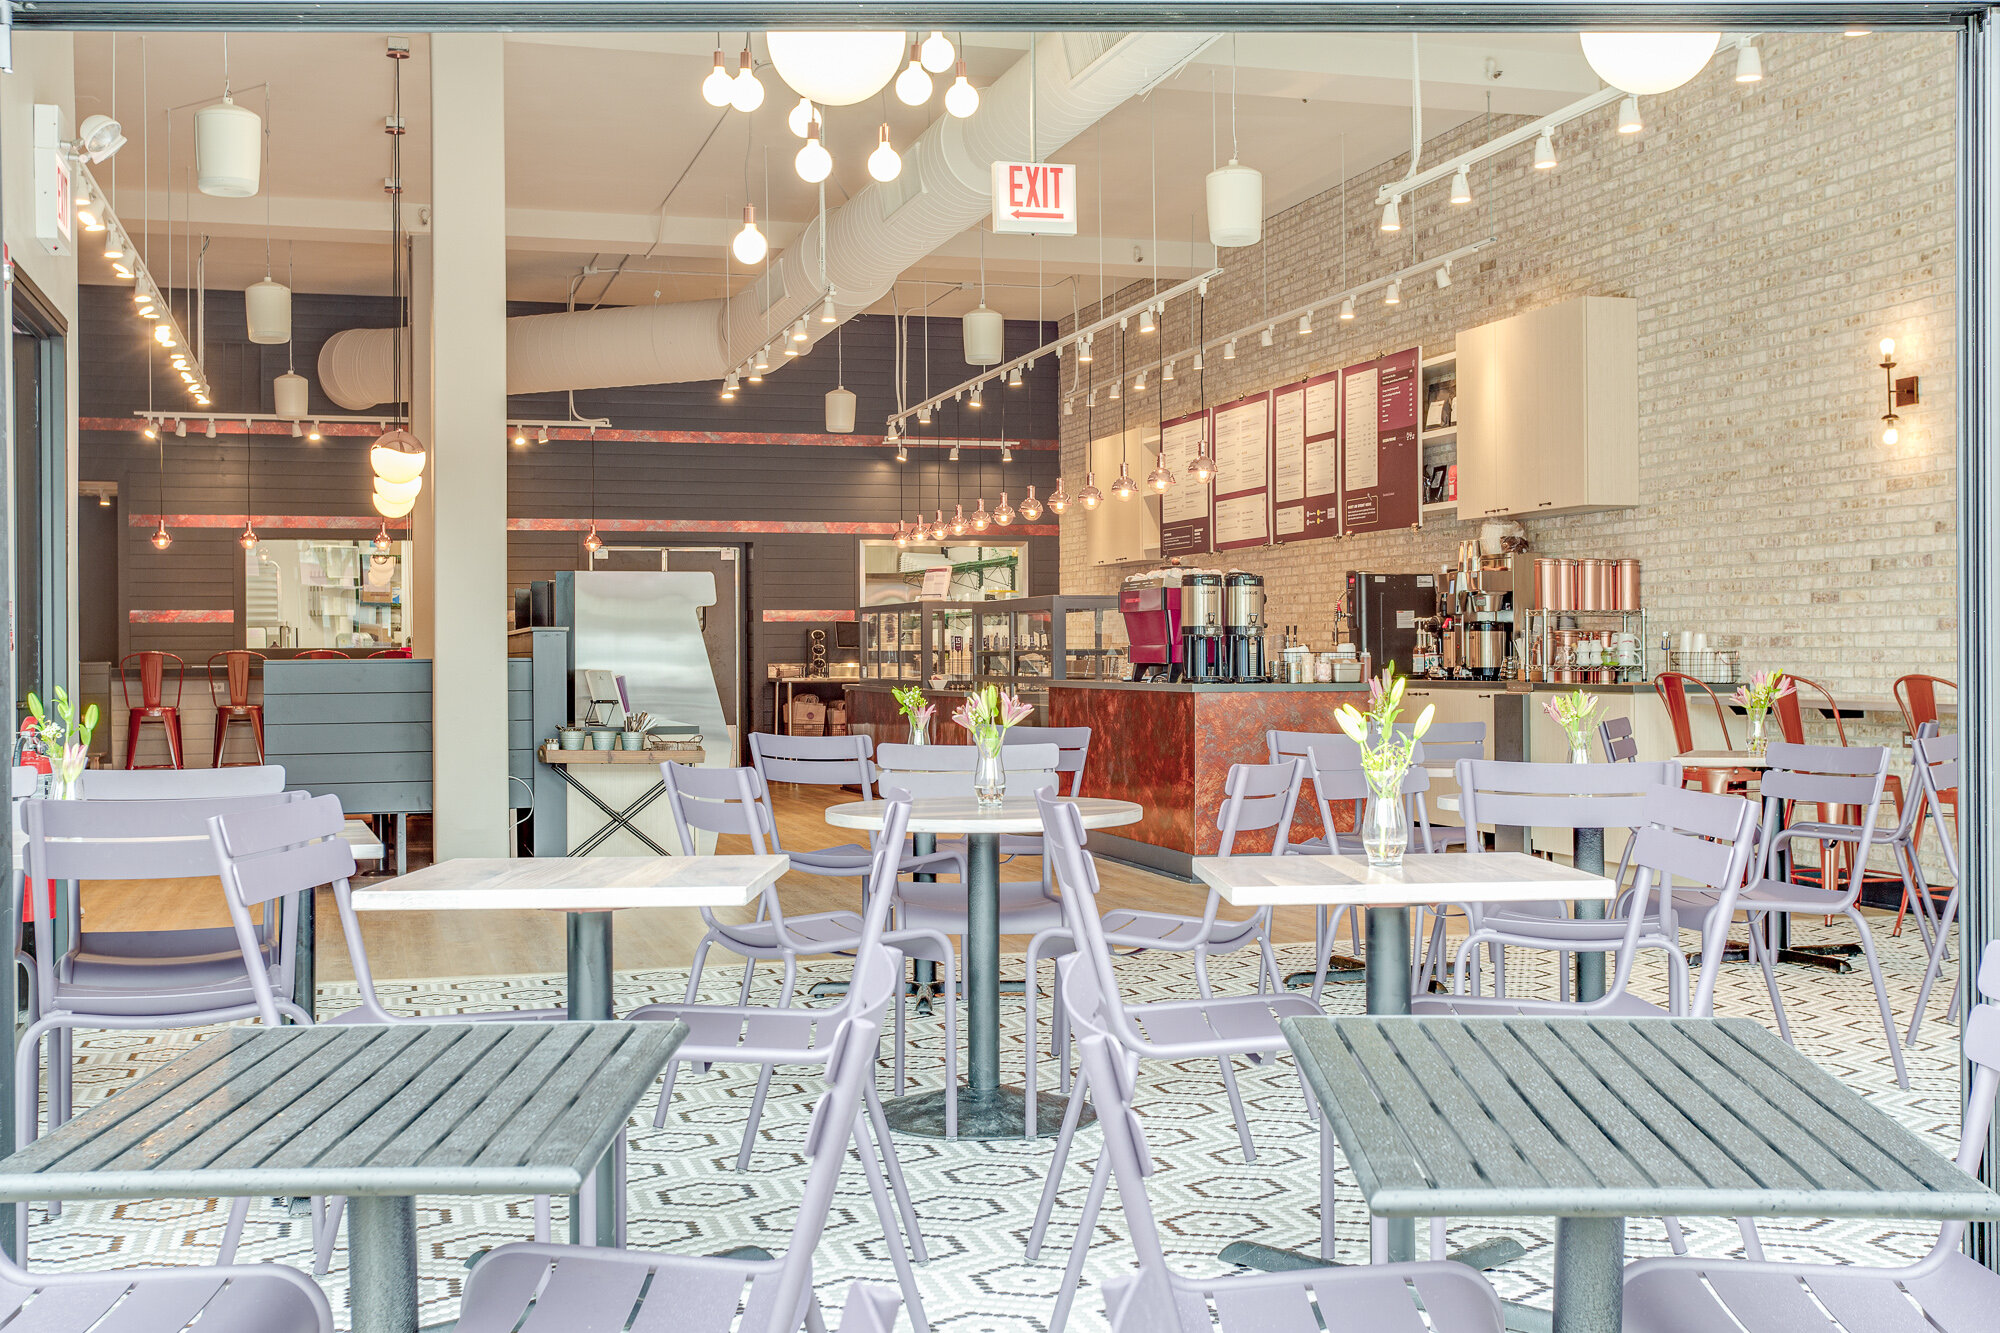 A La Grange restaurant with fresh and inviting restaurant with Ferbob furniture, a mosaic floor with hexagonal tile floor and exposed brick.